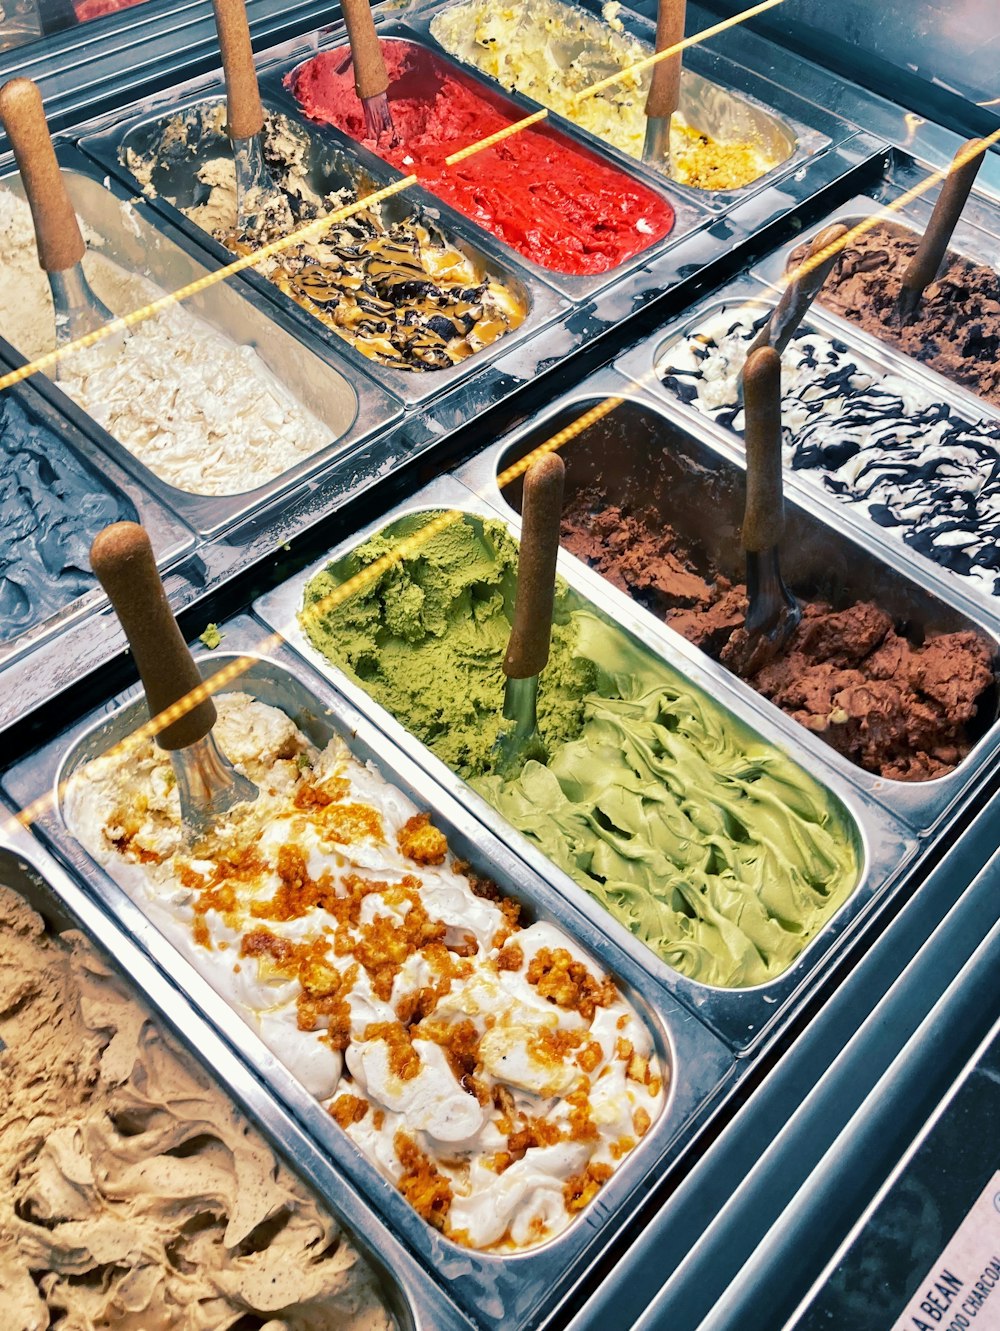 a display case filled with different types of ice cream